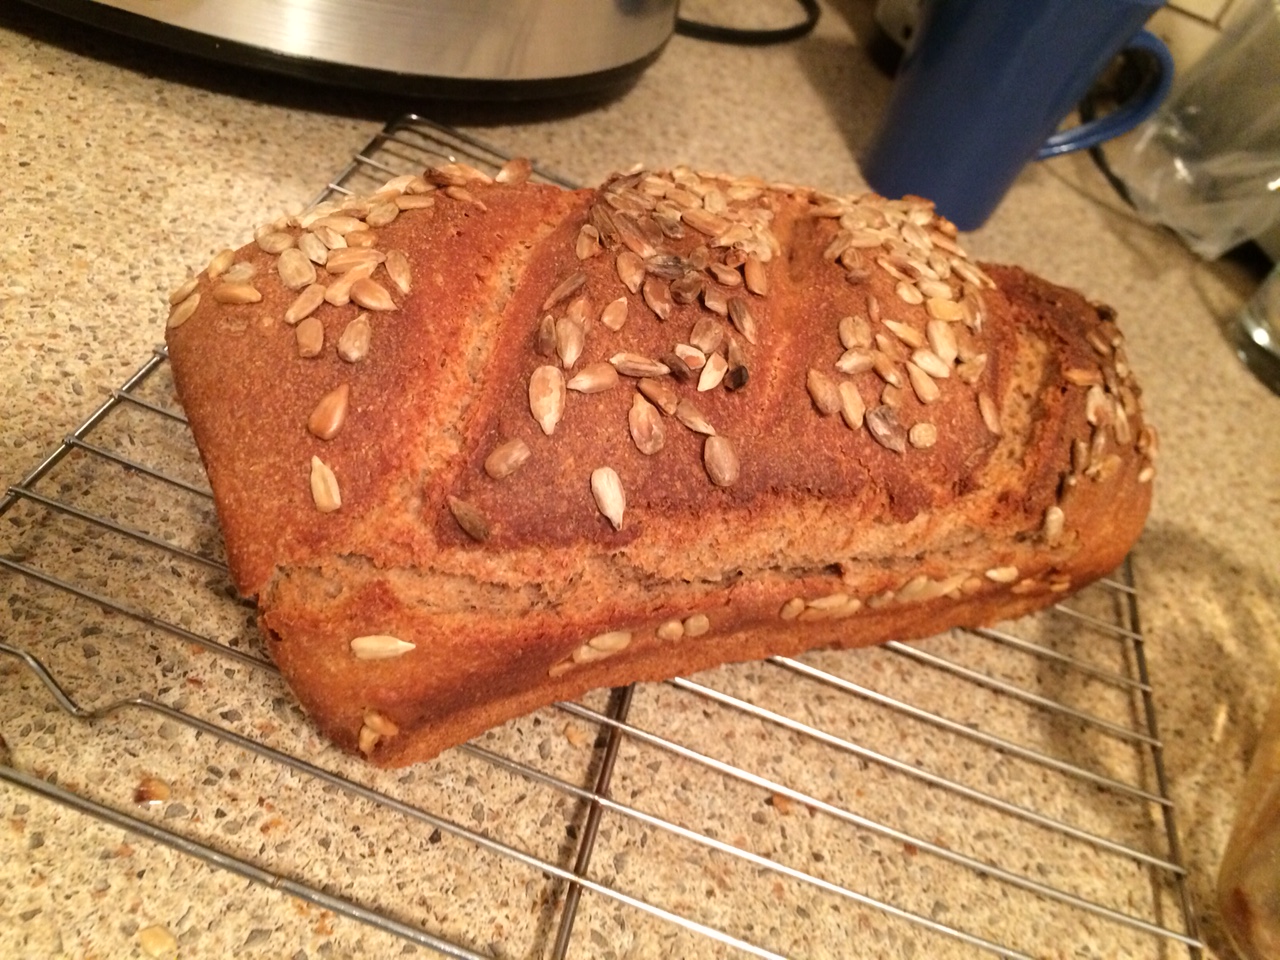 100% whole grain bread with seeds